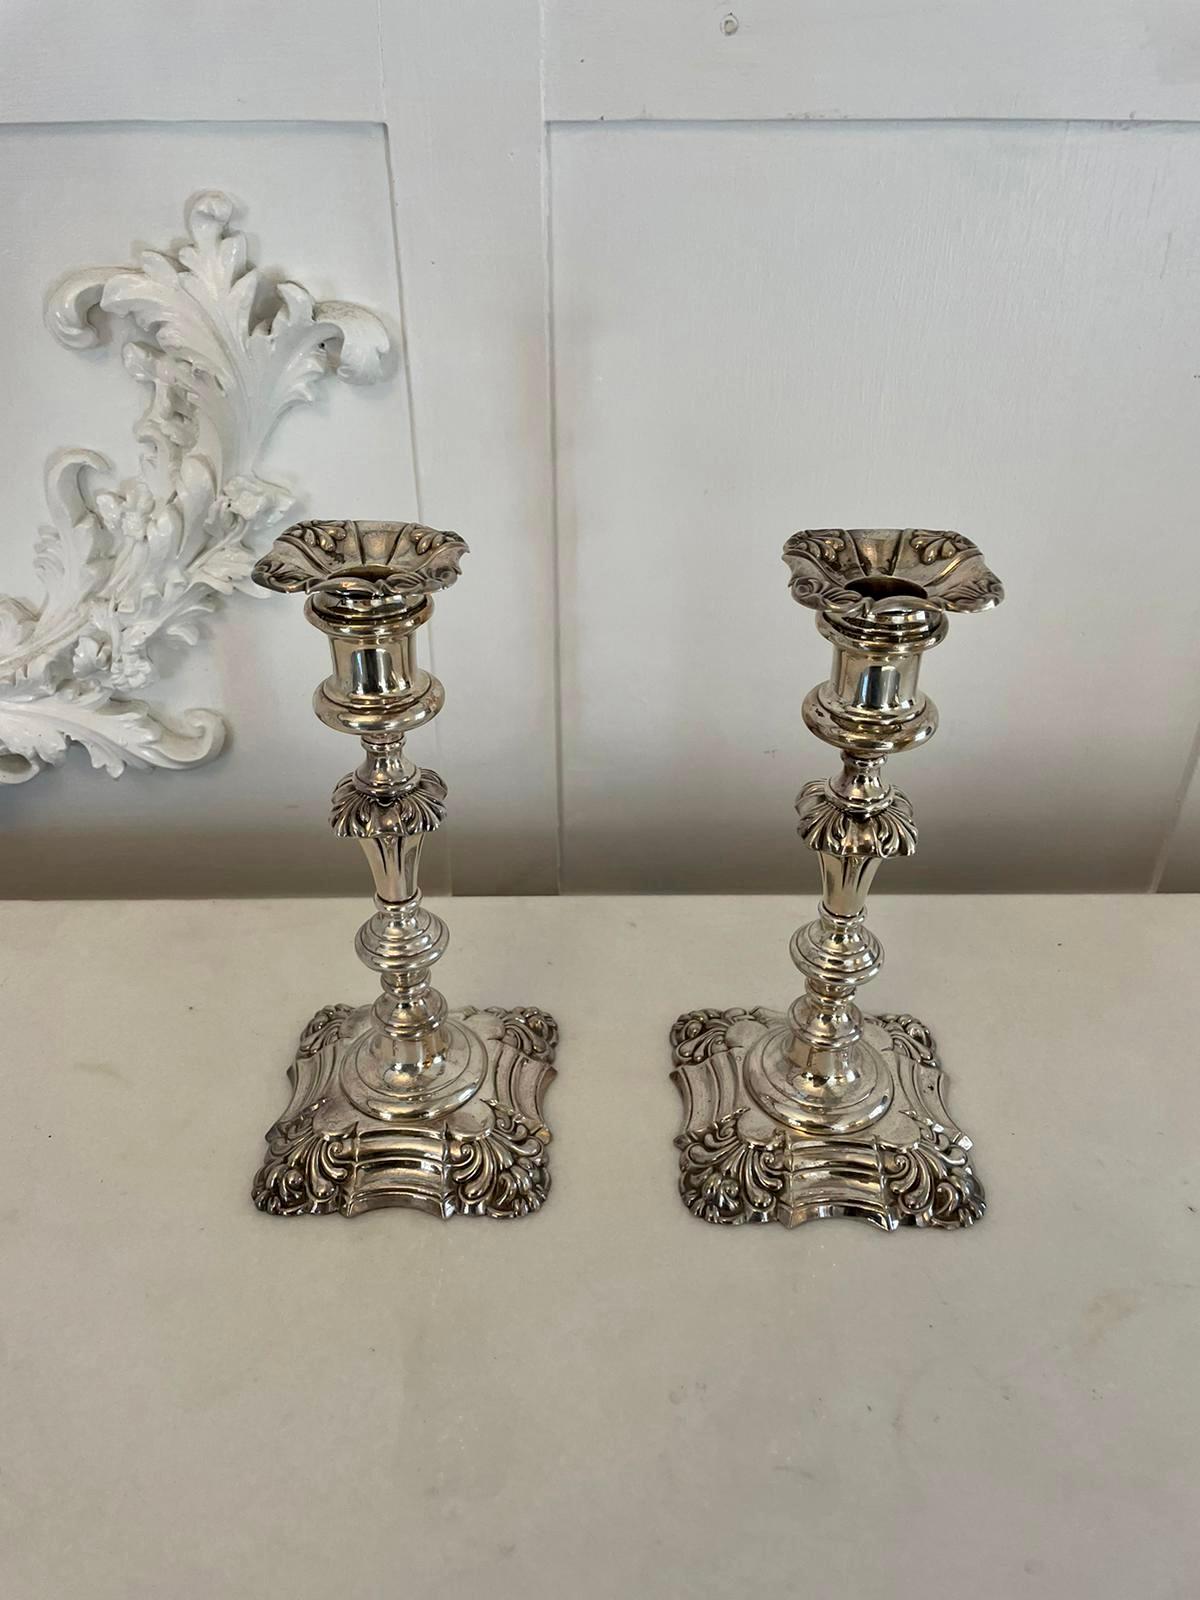 Outstanding quality pair of antique Victorian silver plated candlesticks having an outstanding quality pair of antique Victorian ornate silver plated candlesticks standing on ornate shaped stepped bases

A highly decorative pair in lovely